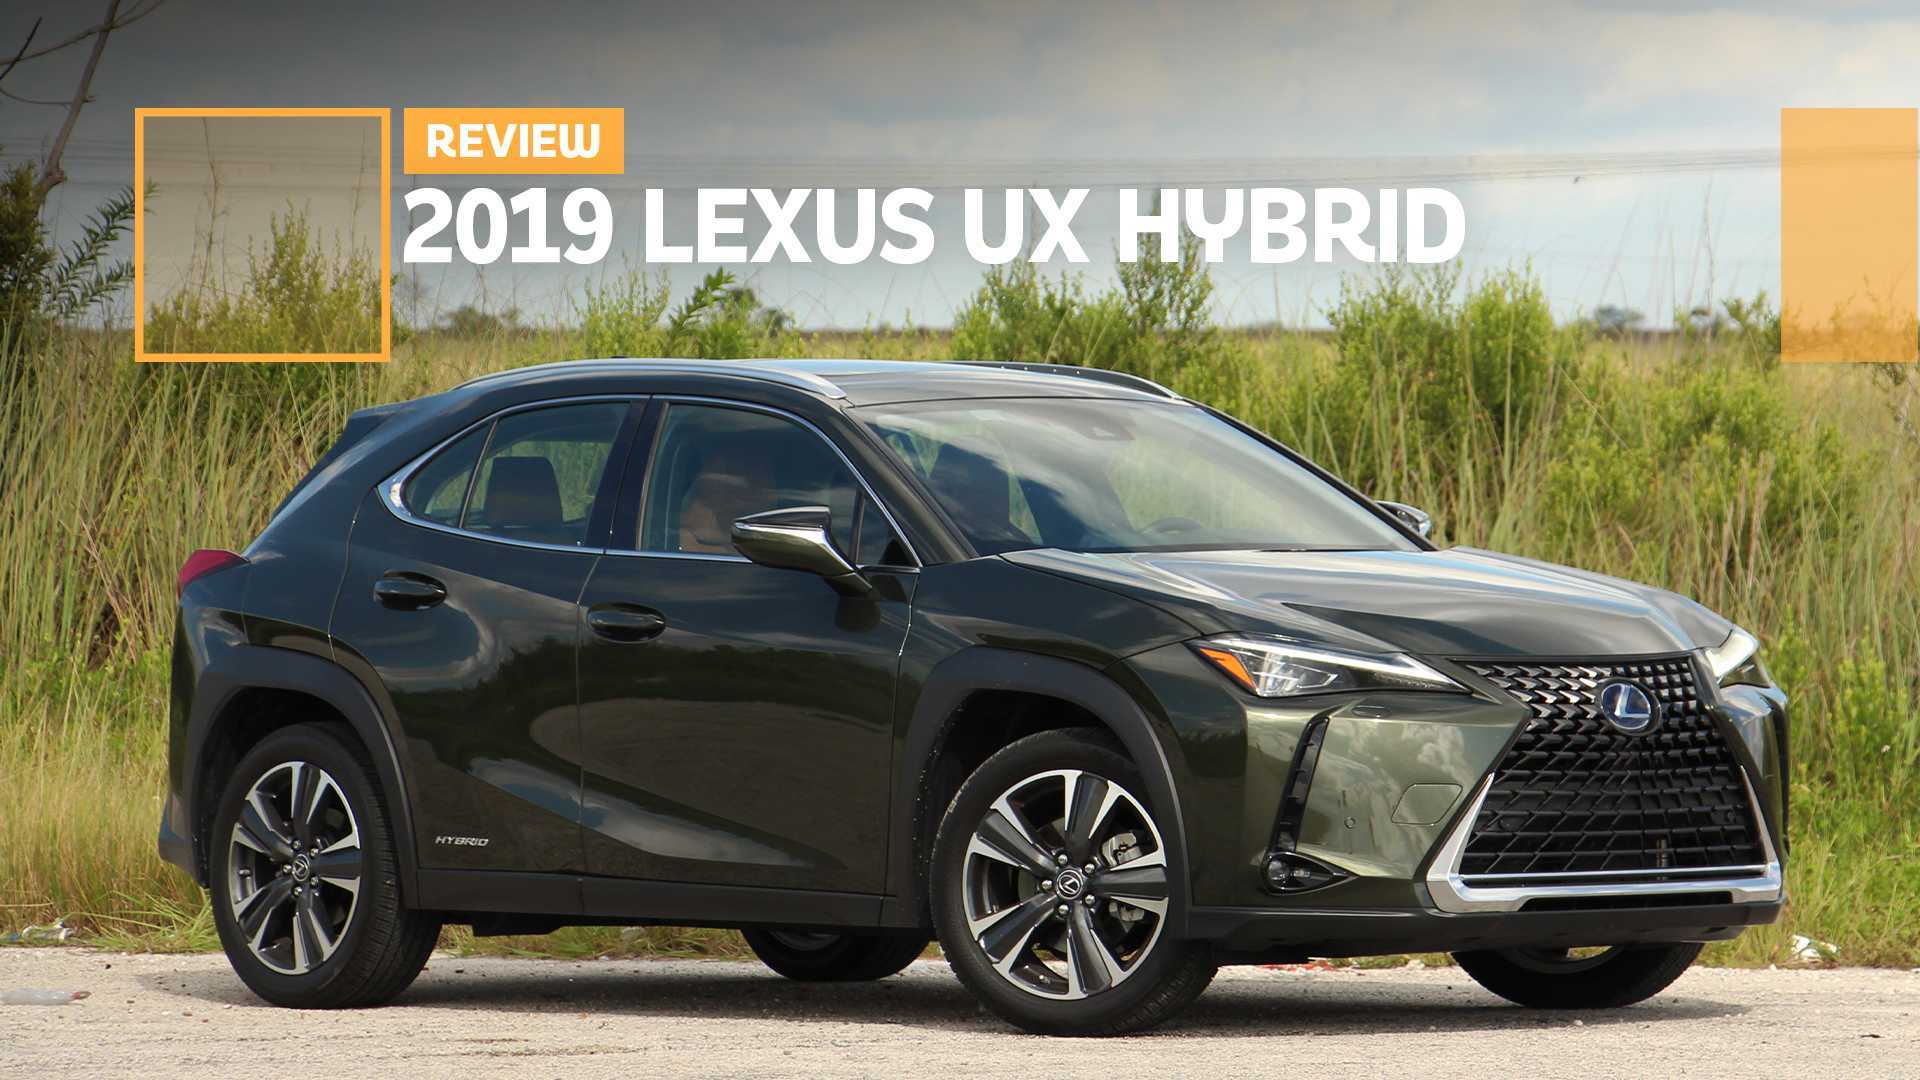 2019 Lexus UX 250h Review: Efficient, Affordable, And Downright Charming